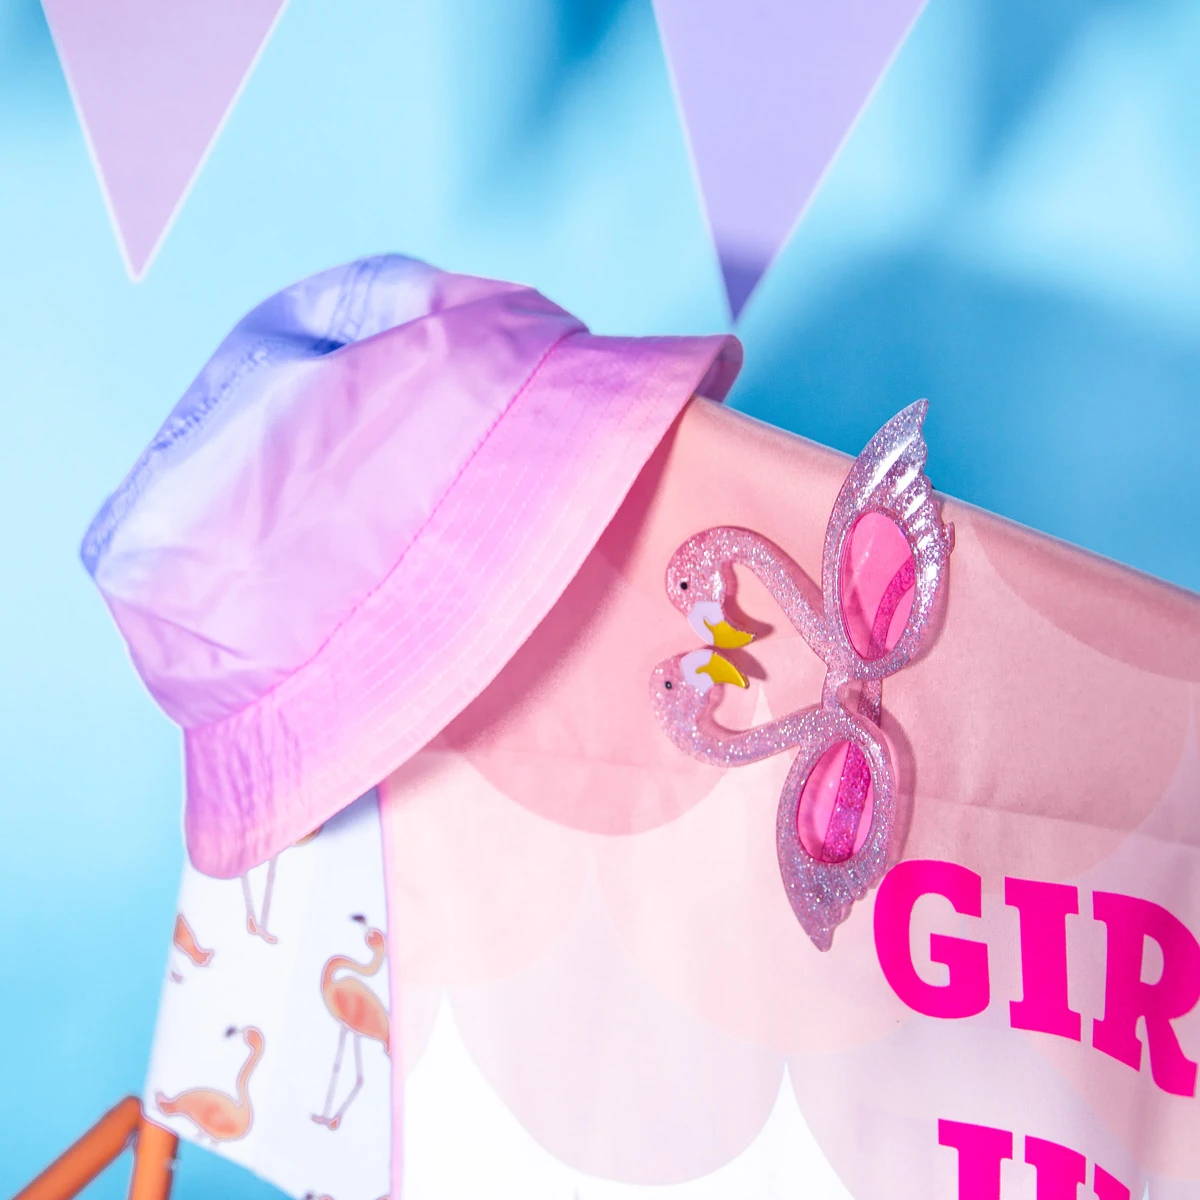 Flamingo-themed party accessories including a pink bucket hat and glittery flamingo glasses on a draped pink fabric